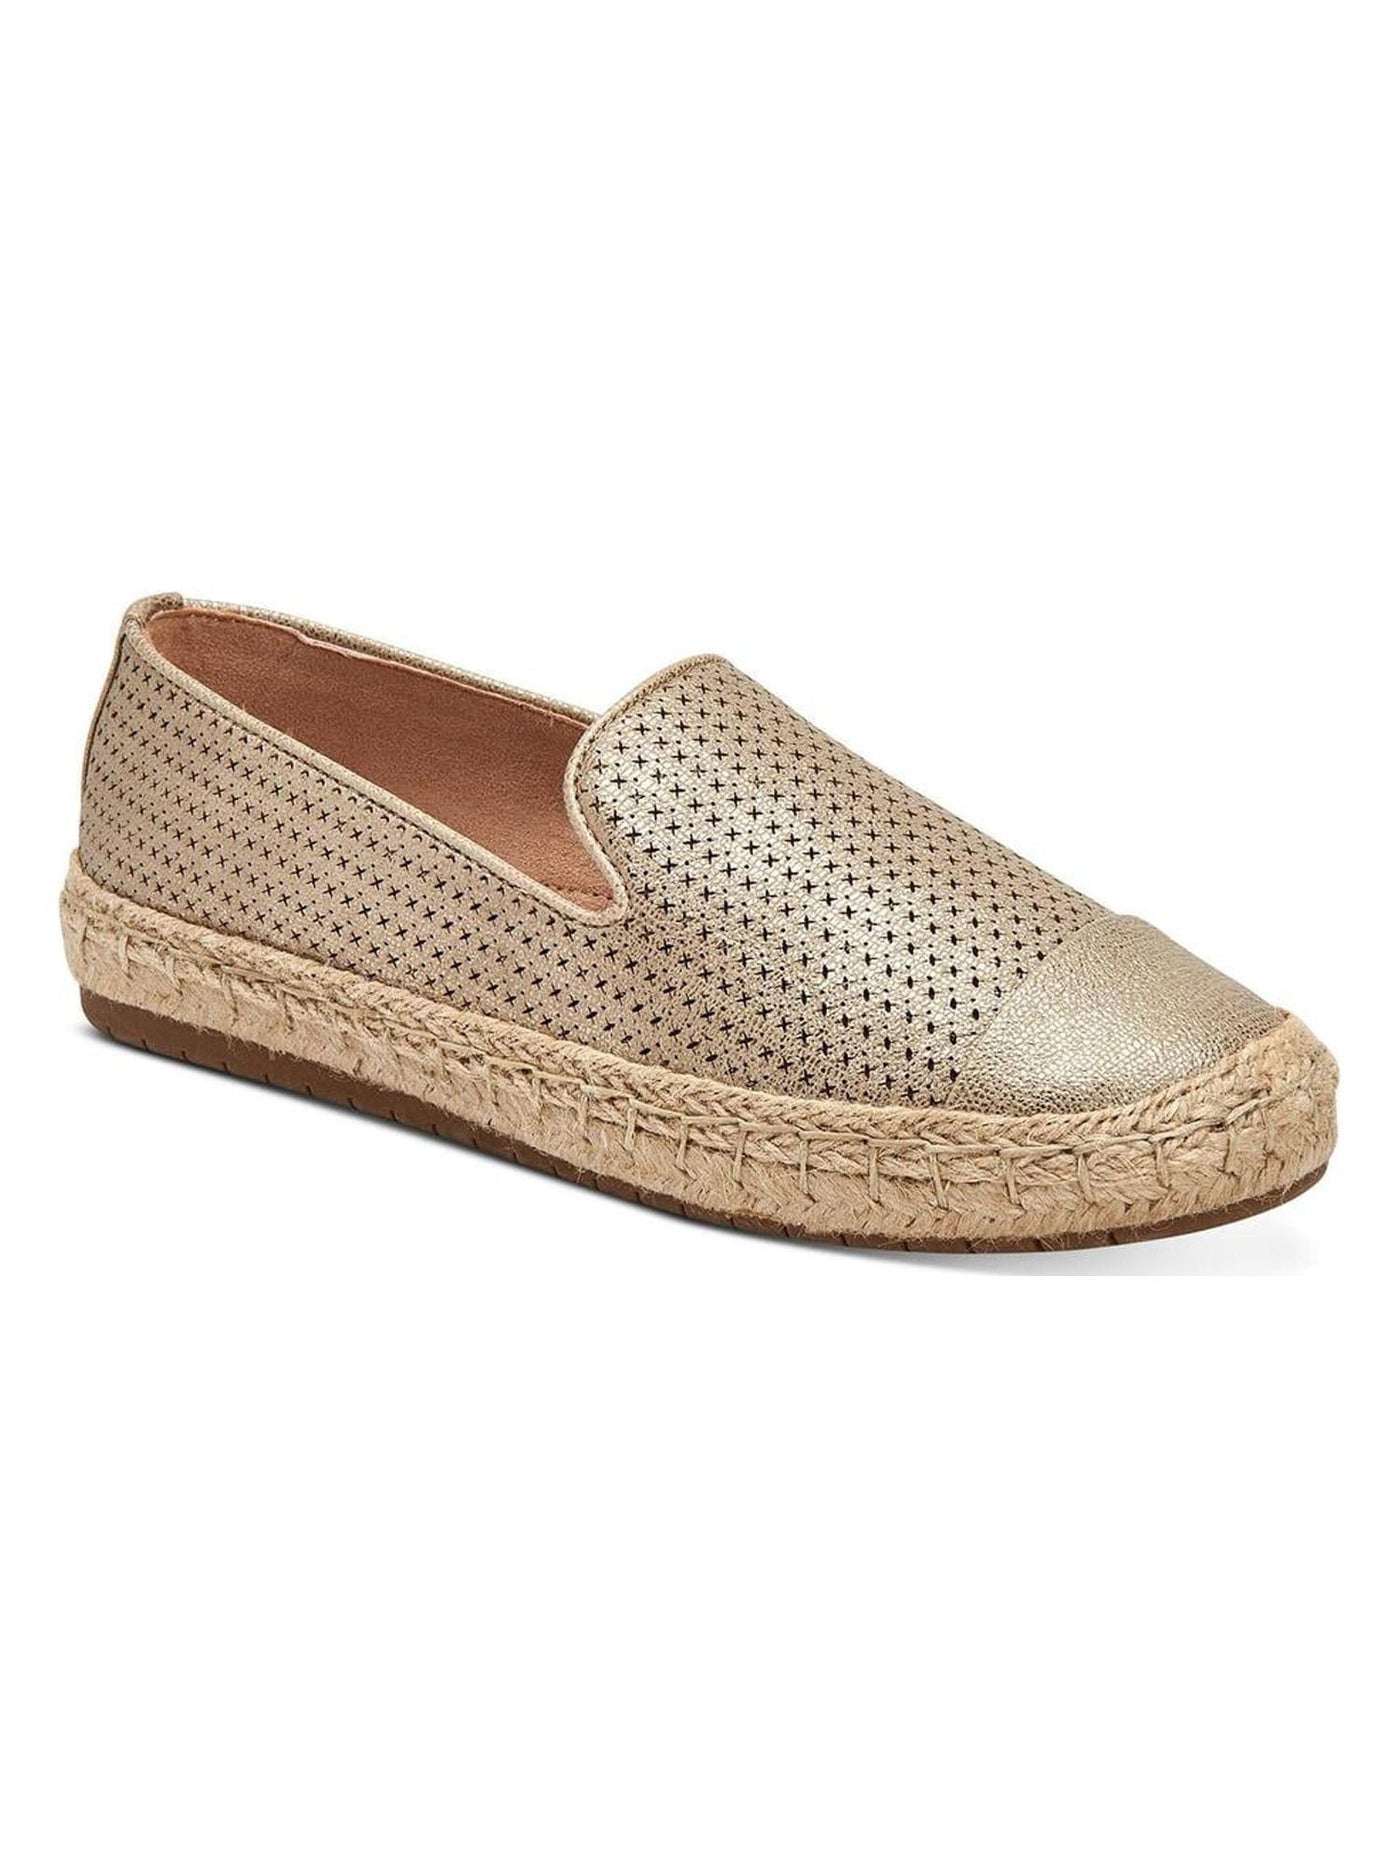 CHARTER CLUB Womens Gold Perforated Padded Jonii Cap Toe Platform Slip On Espadrille Shoes 5 M